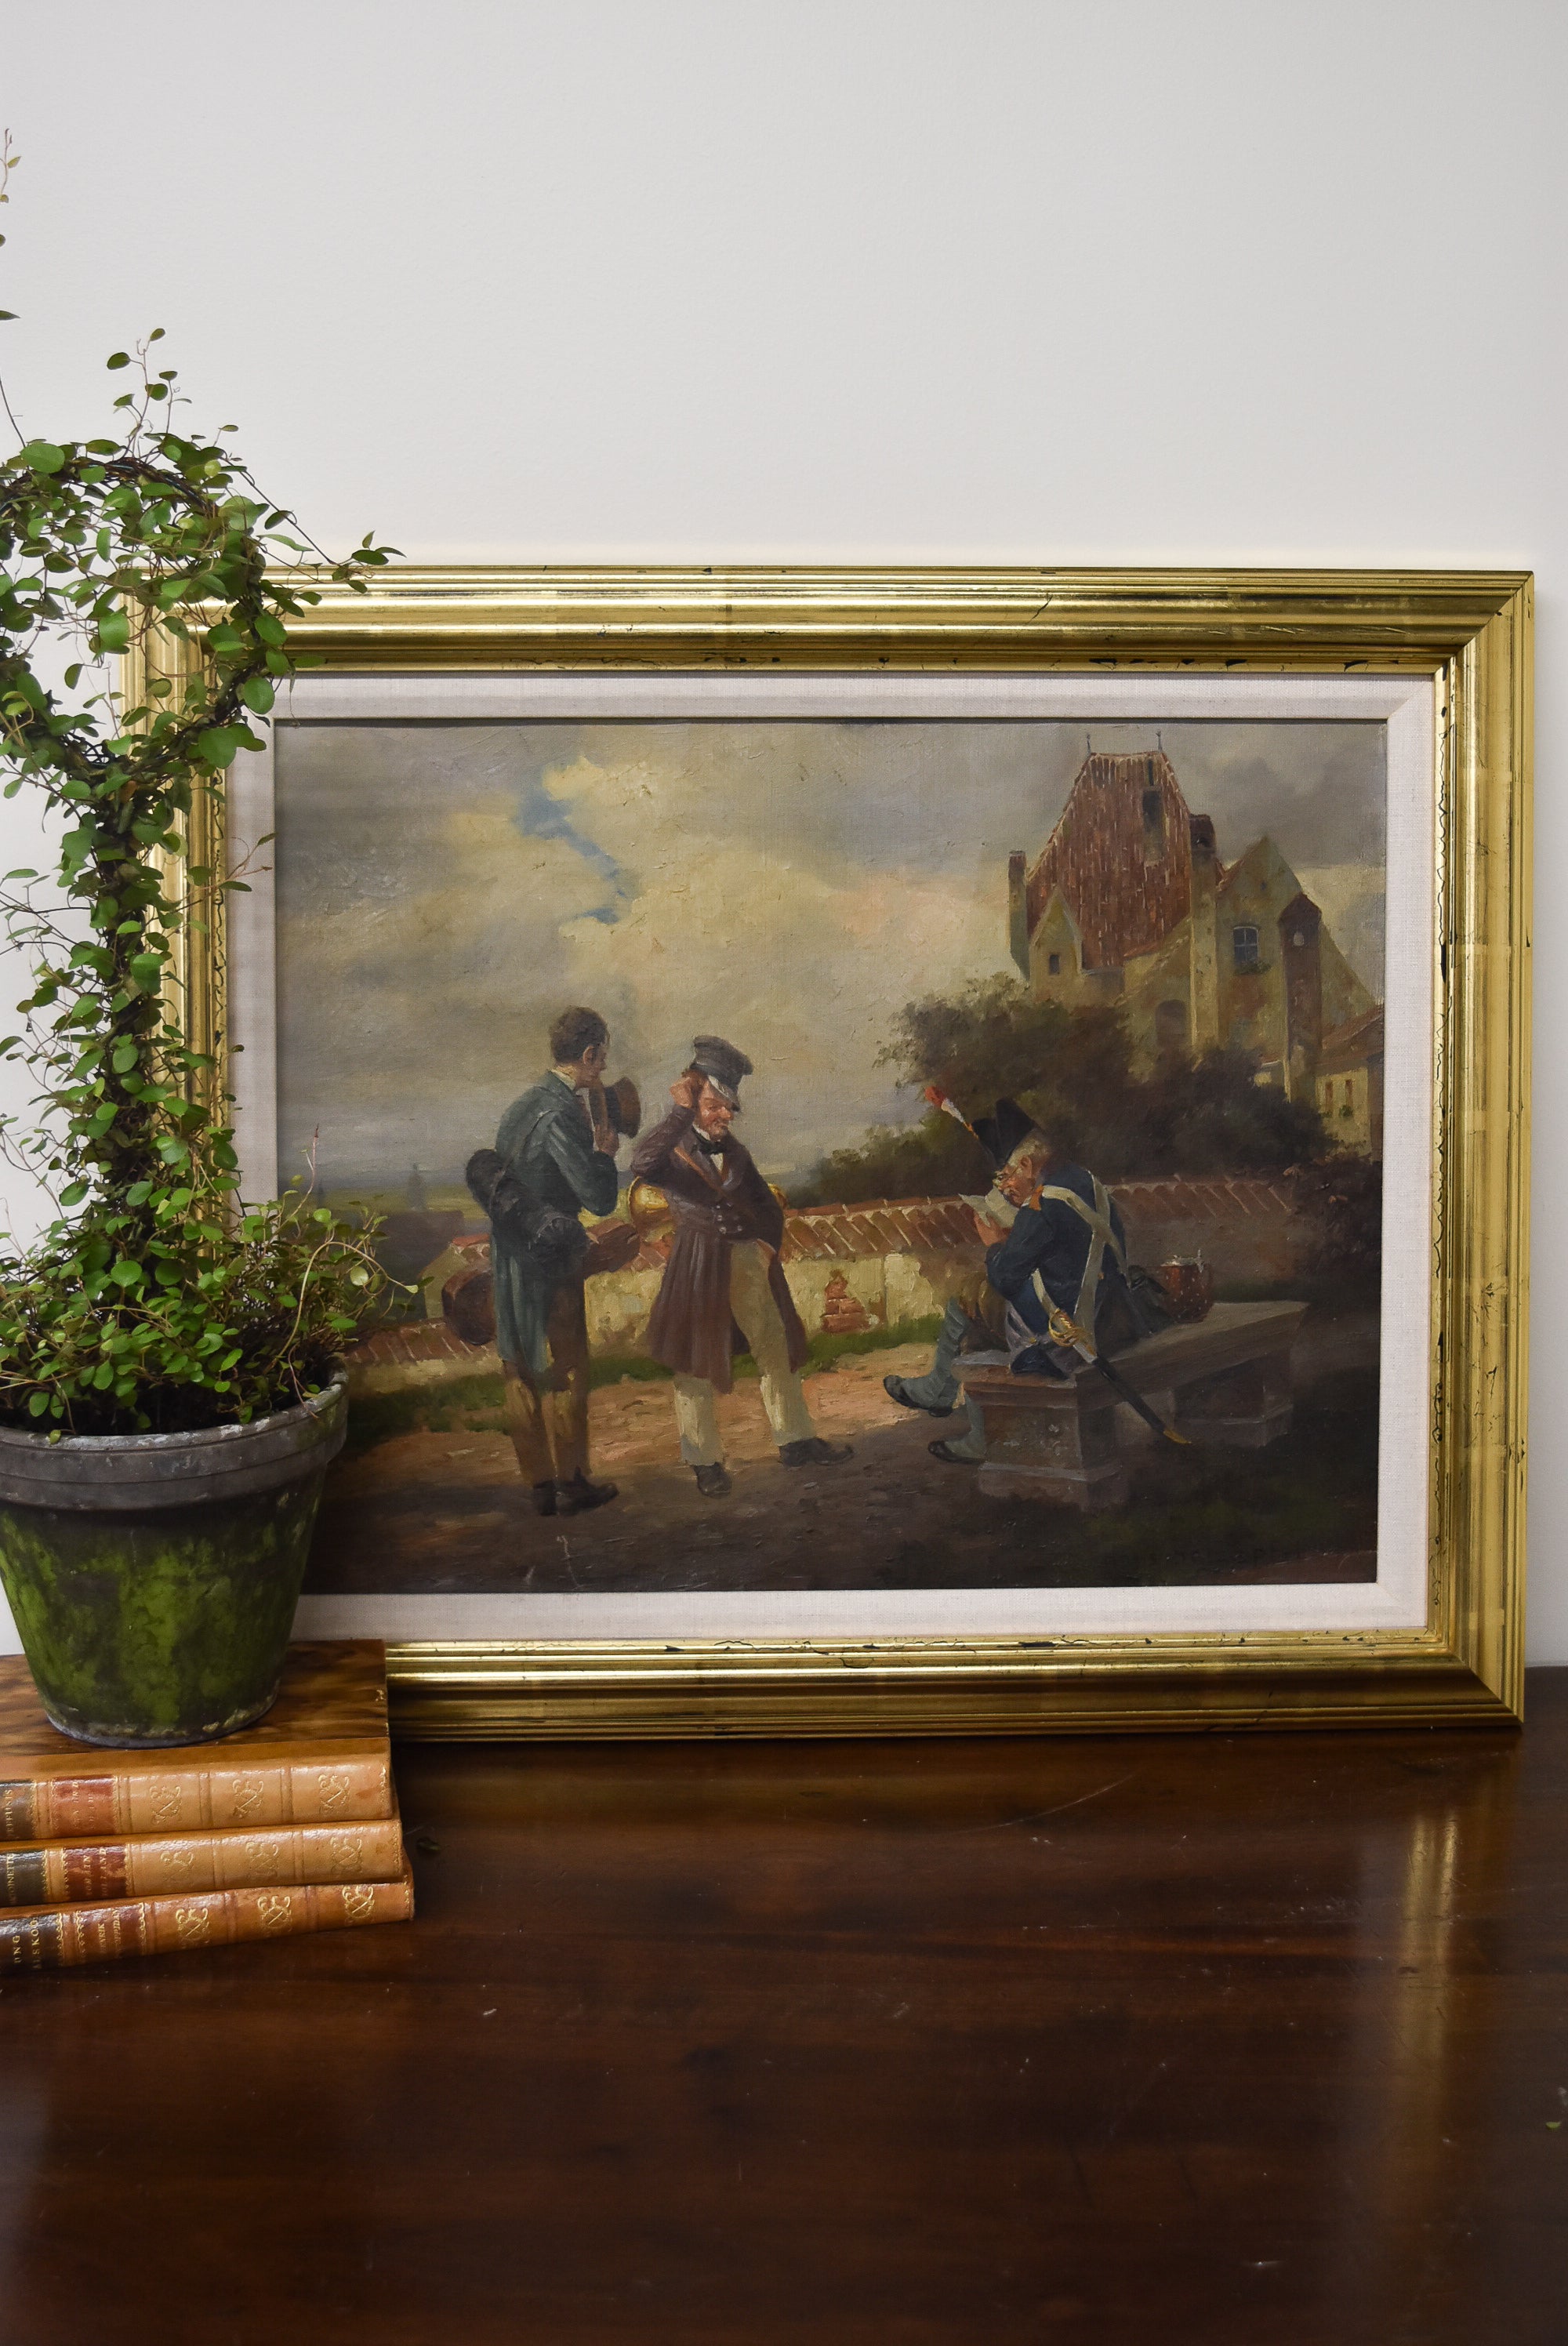 Late 19th Century Continental Oil Painting